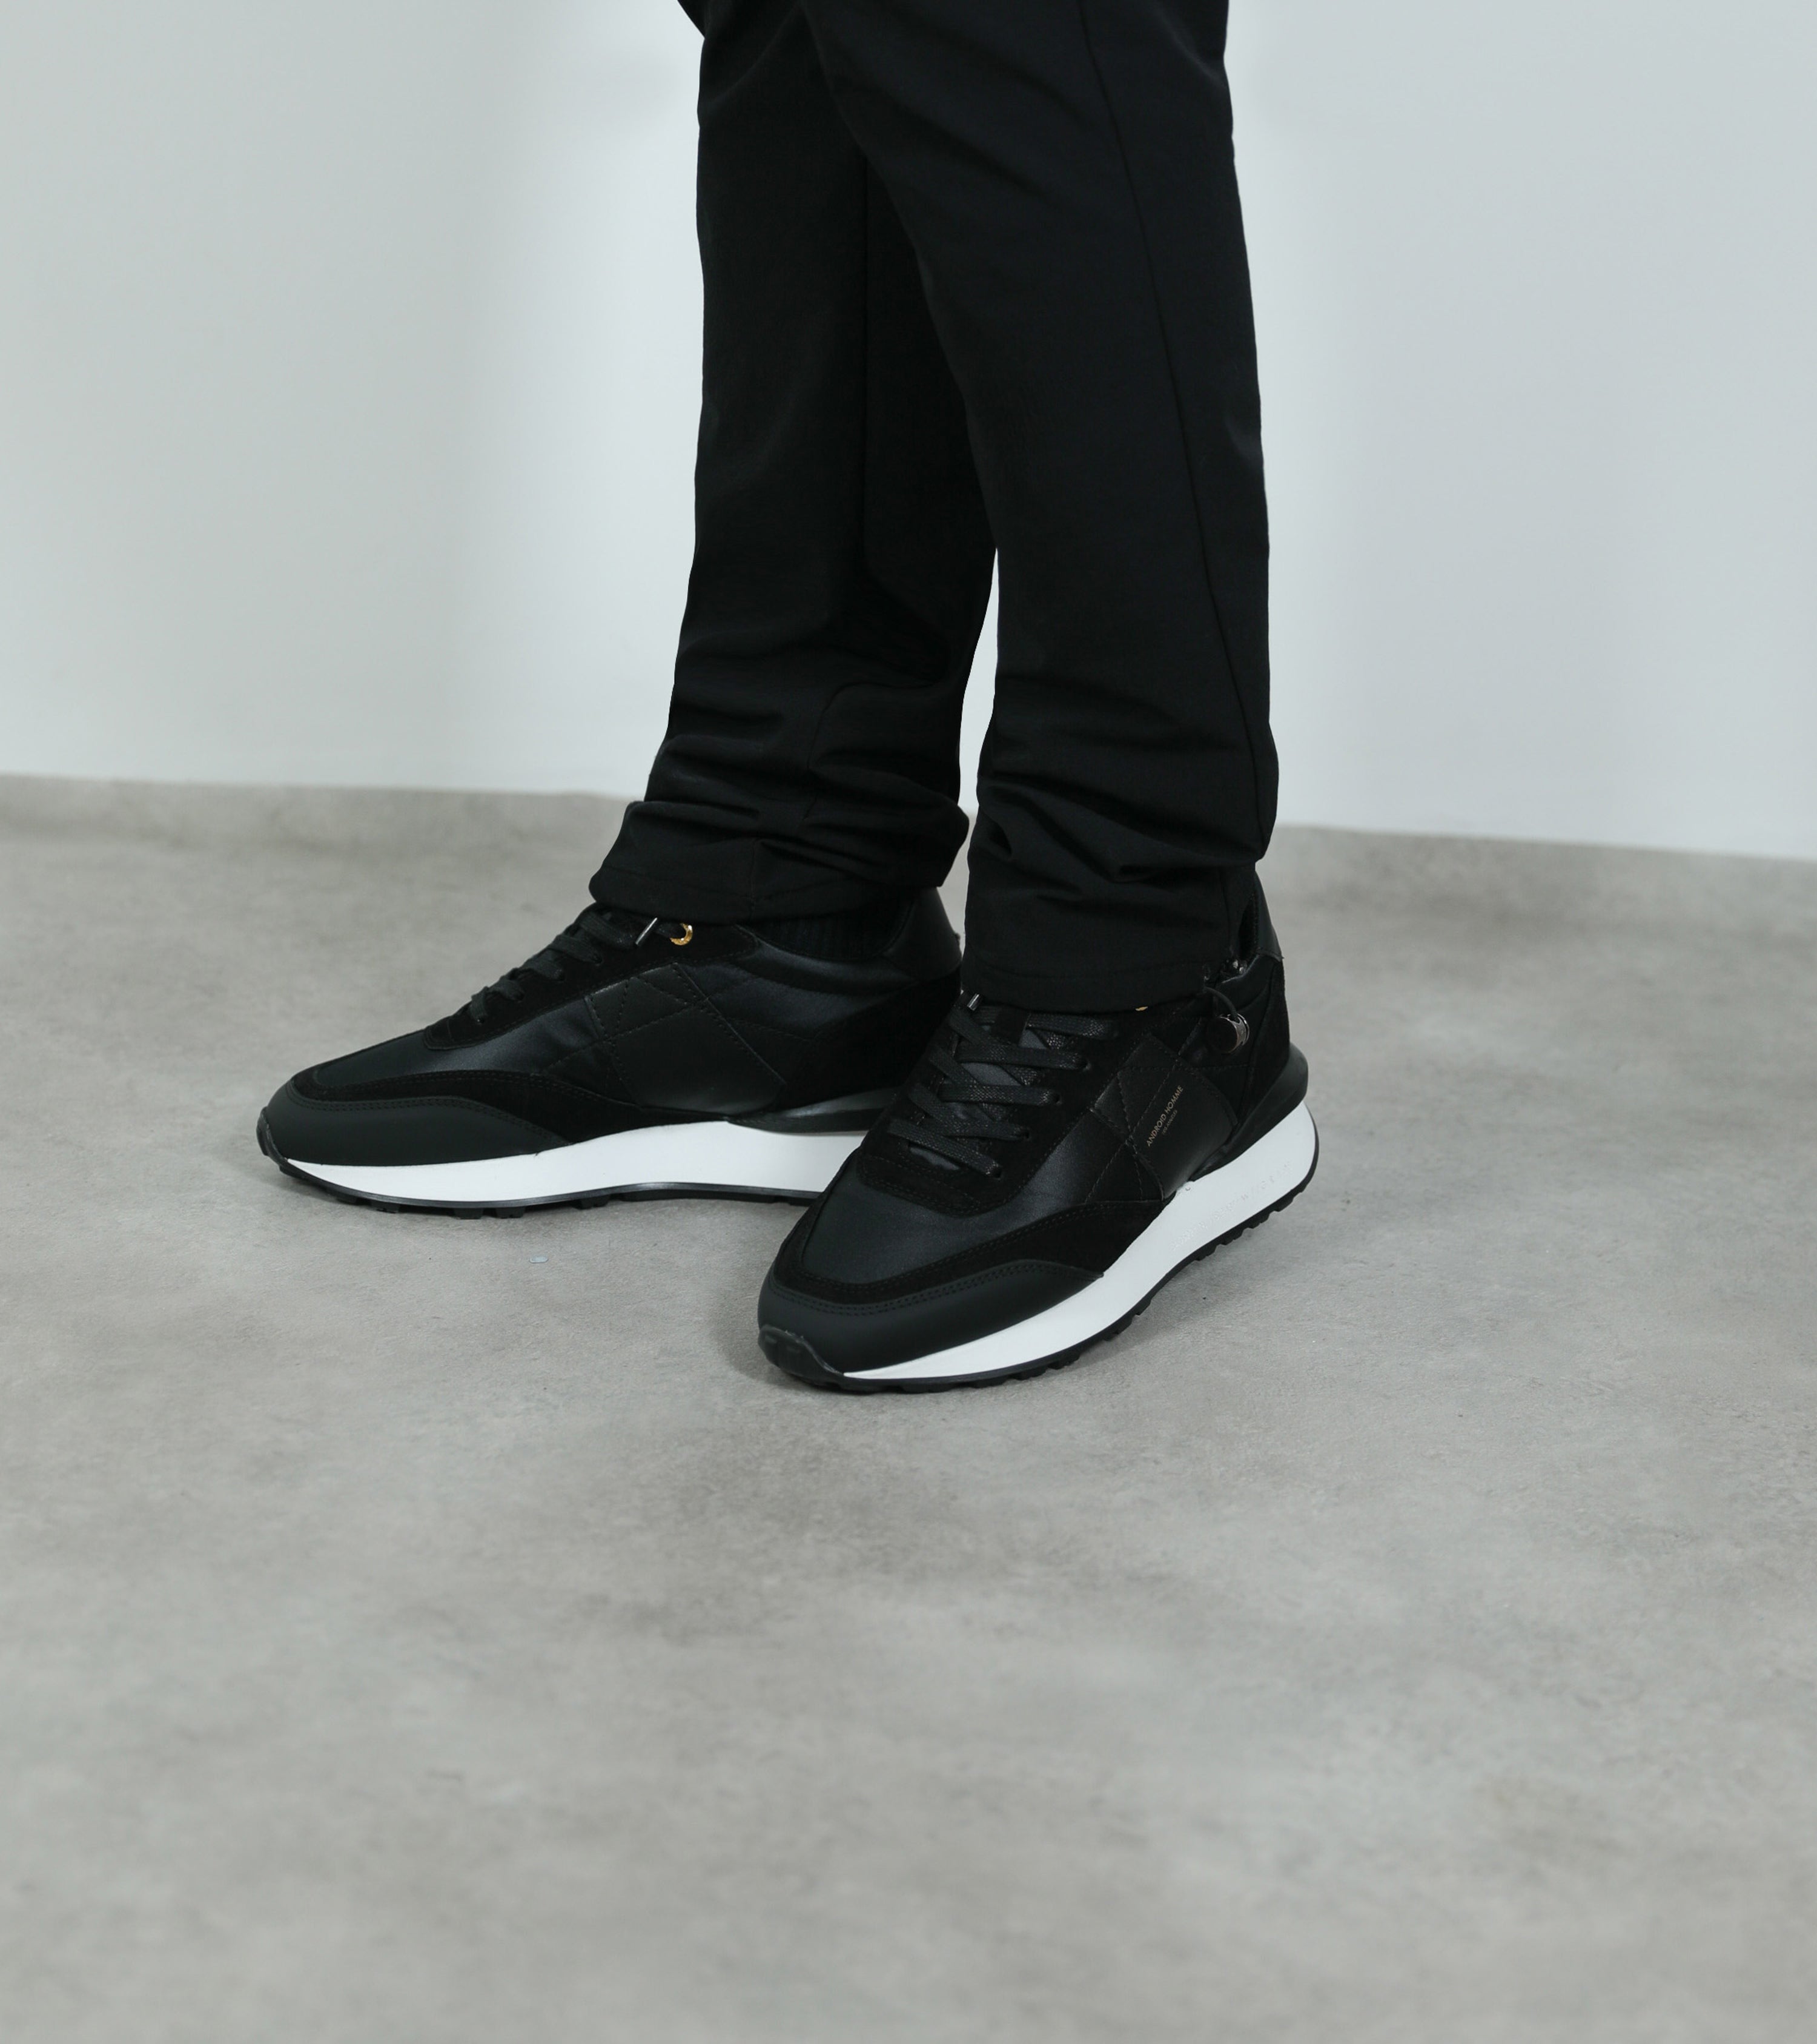 Ecom imagery of the Marina Del Rey Black Nylon Black Suede Android Homme Trainers on foot.